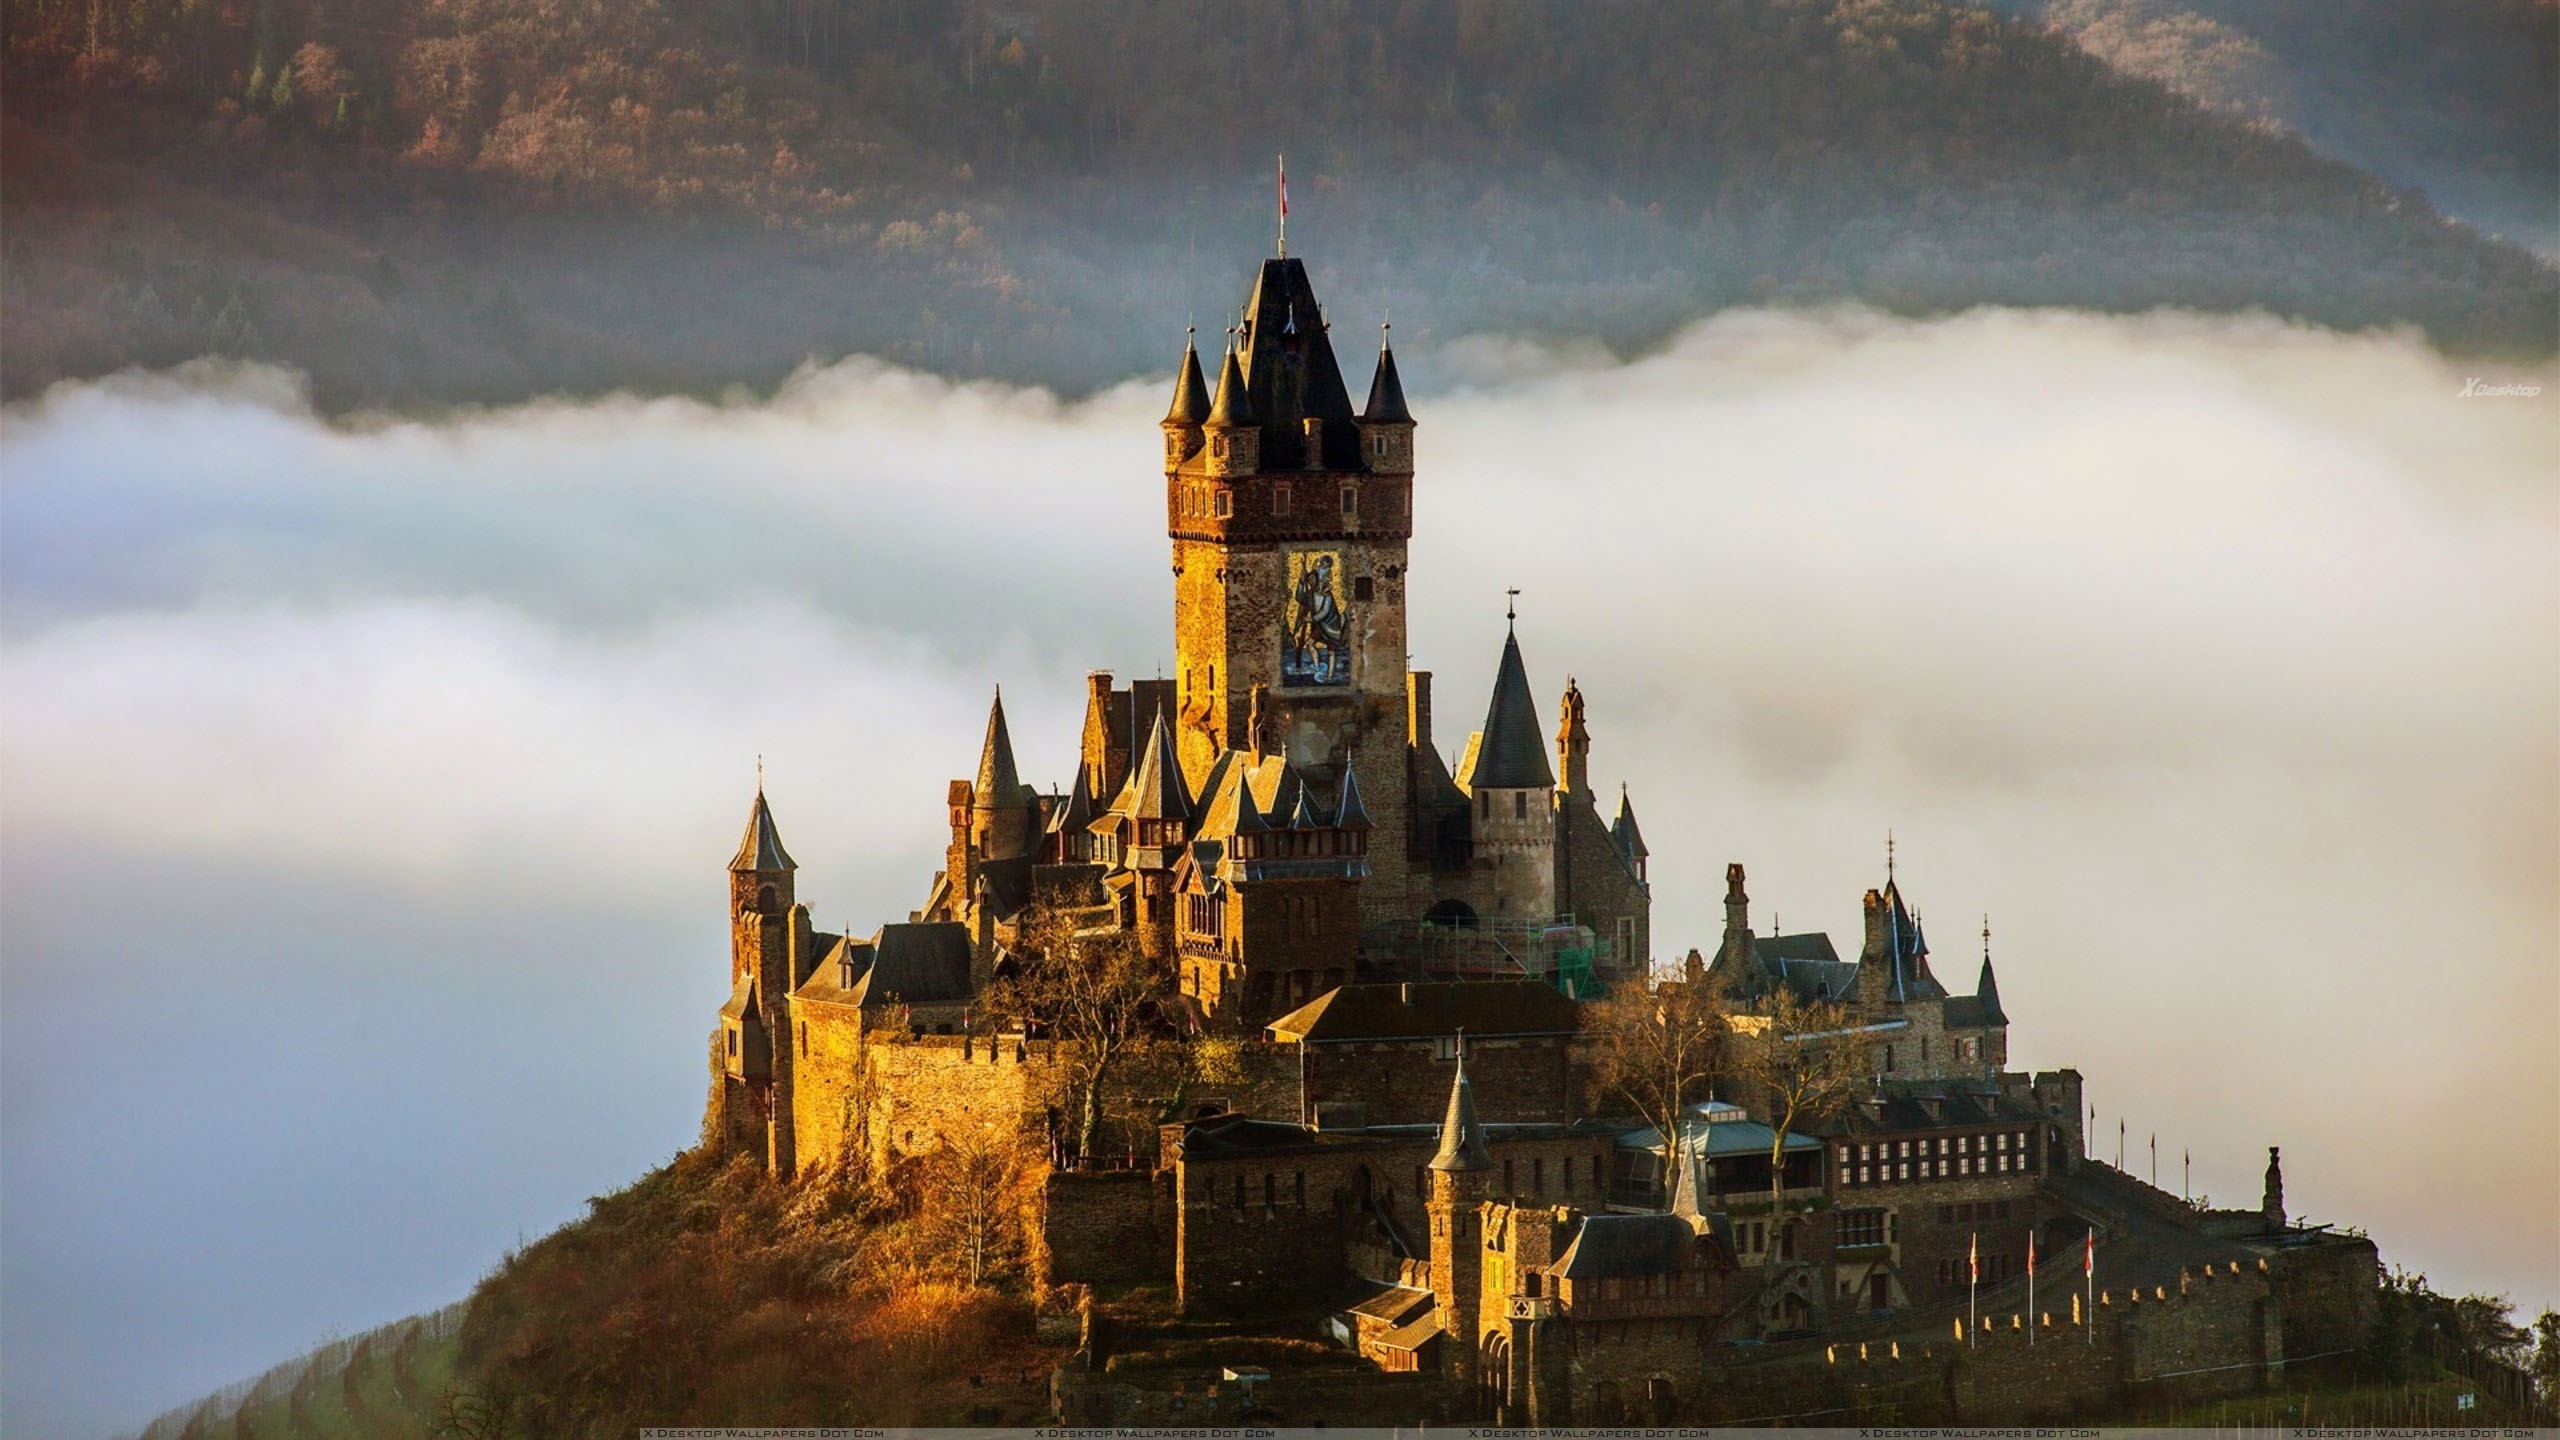 A Fabulous Castle On The Top Of Mountain Wallpaper